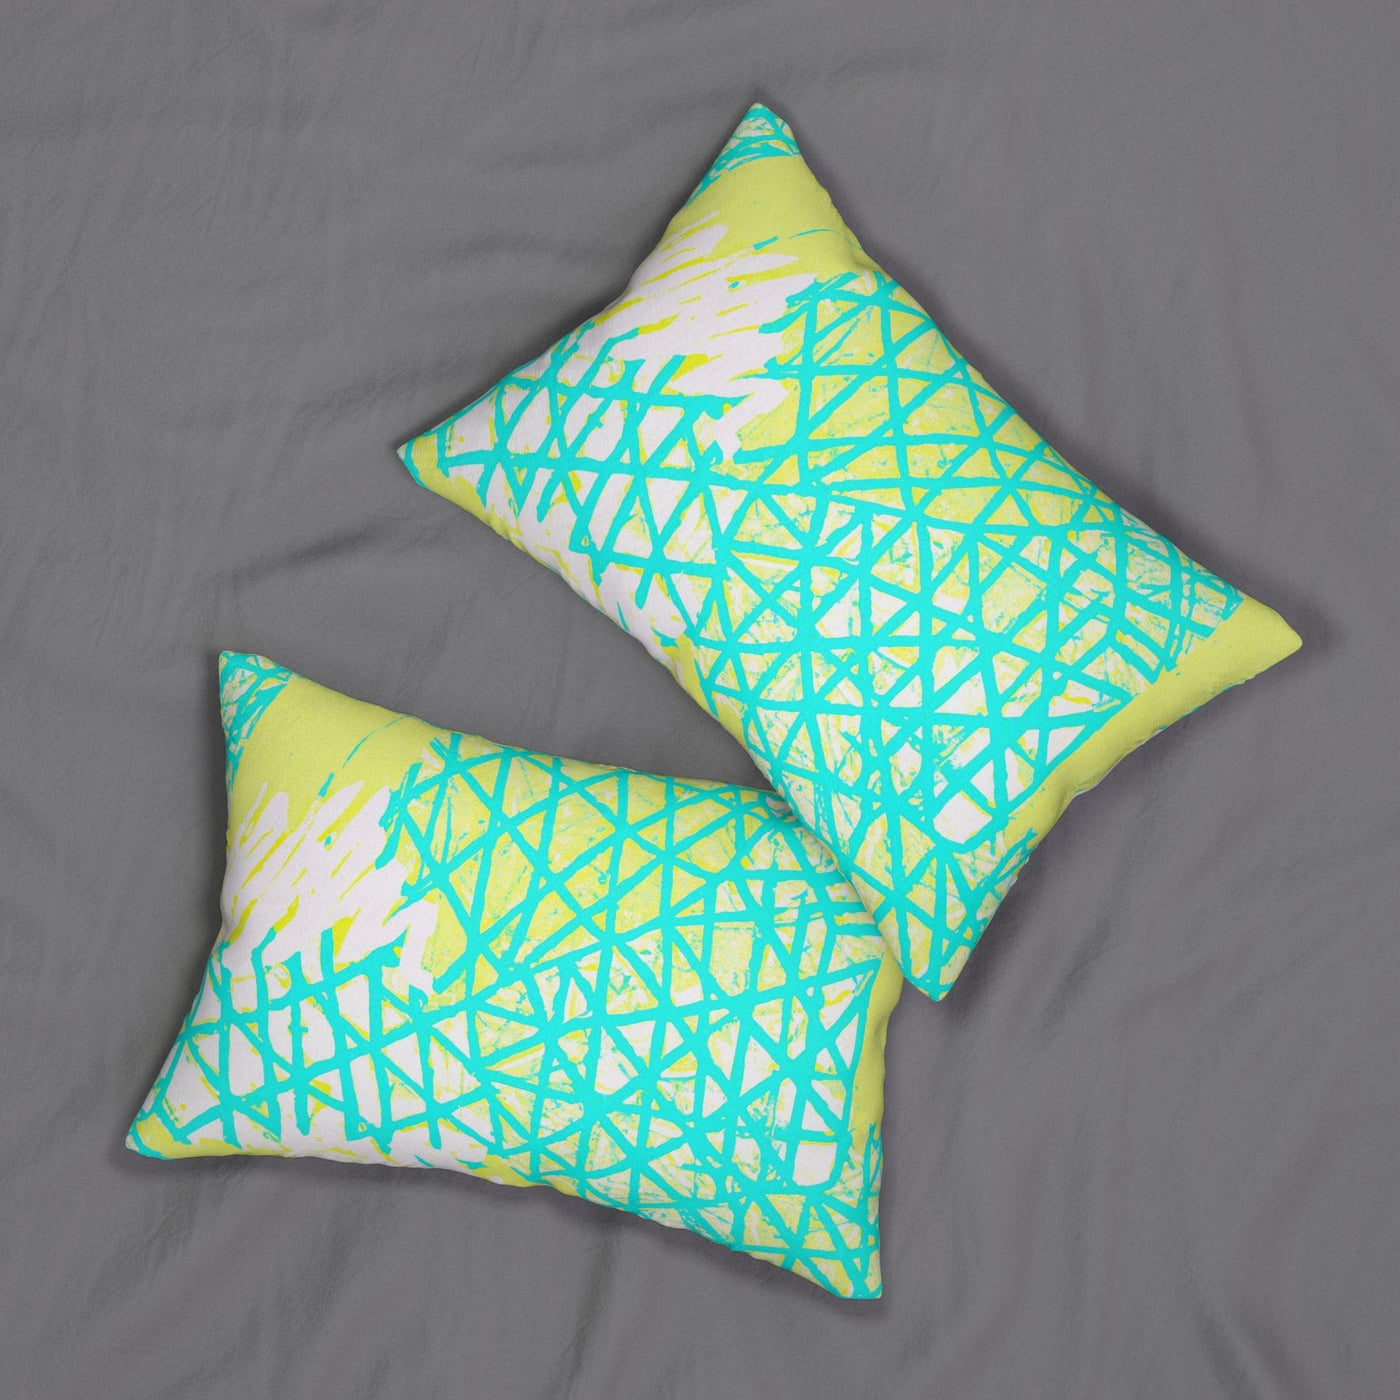 Decorative Lumbar Throw Pillow - Cyan Blue Lime Green And White Pattern